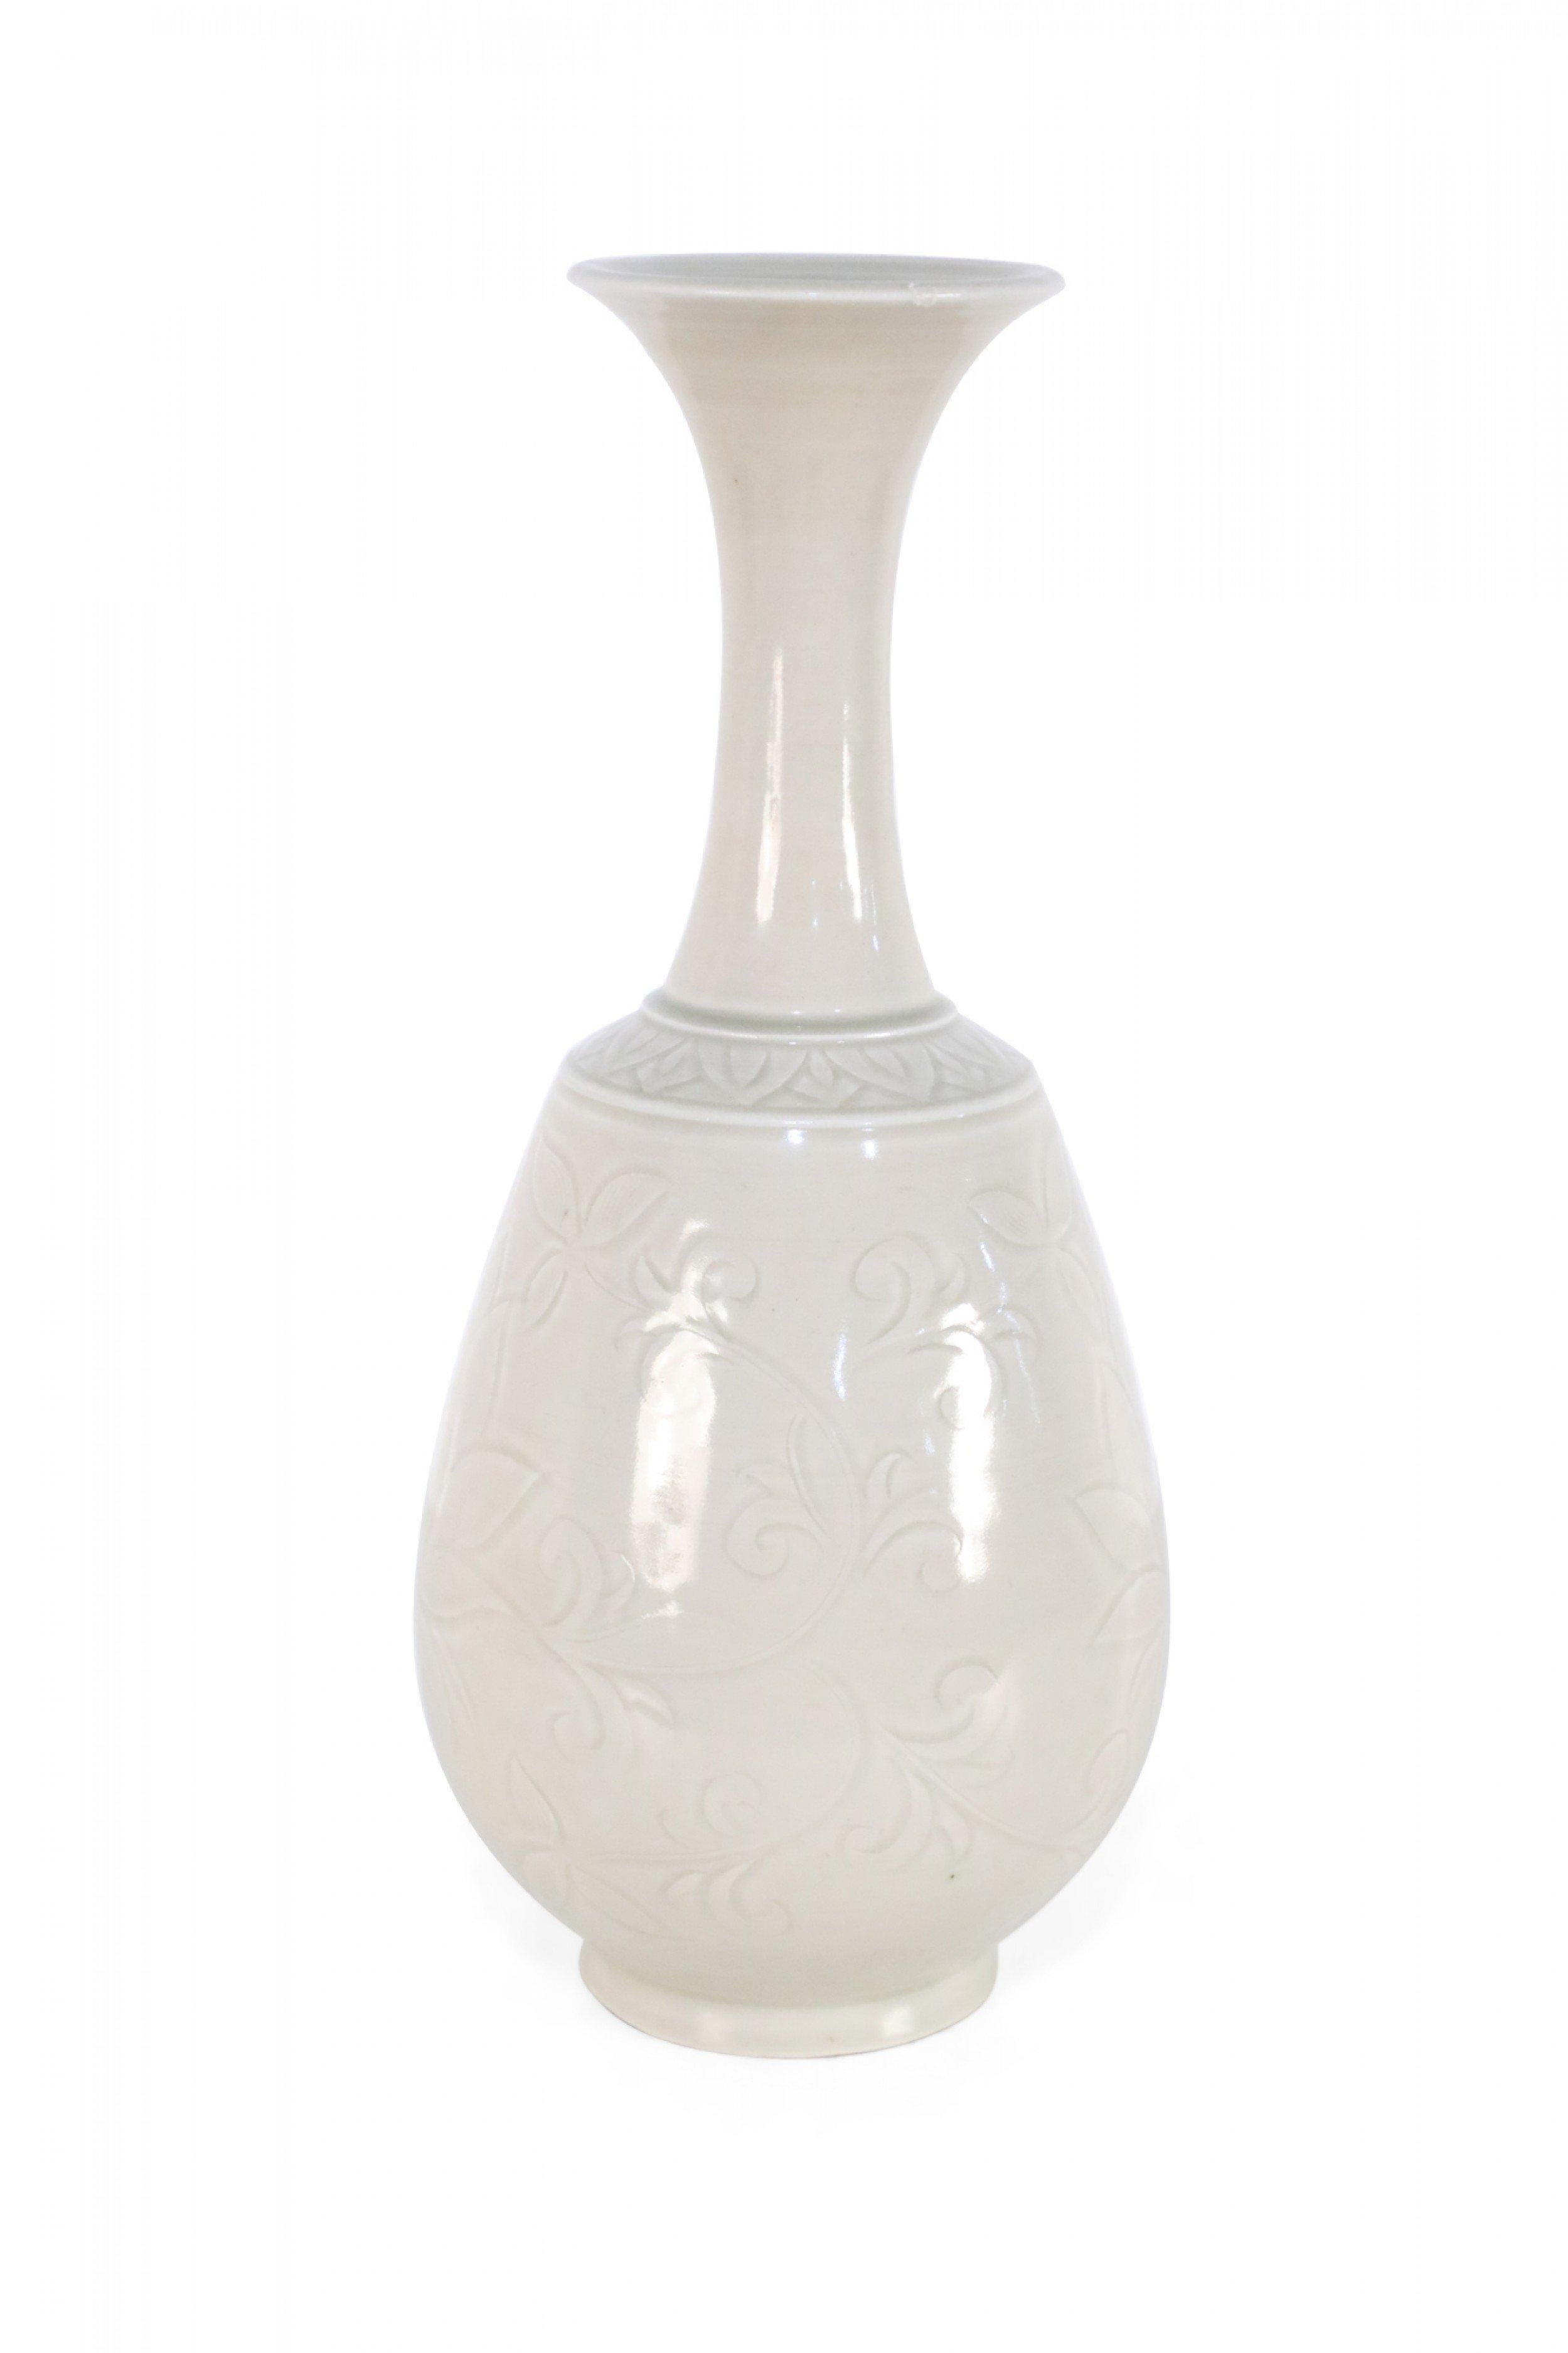 Chinese beige porcelain vase crafted in the style of the Song Dynasty with a thin fluted neck leading to a bulbous bottom decorated in an incised floral pattern. 
    